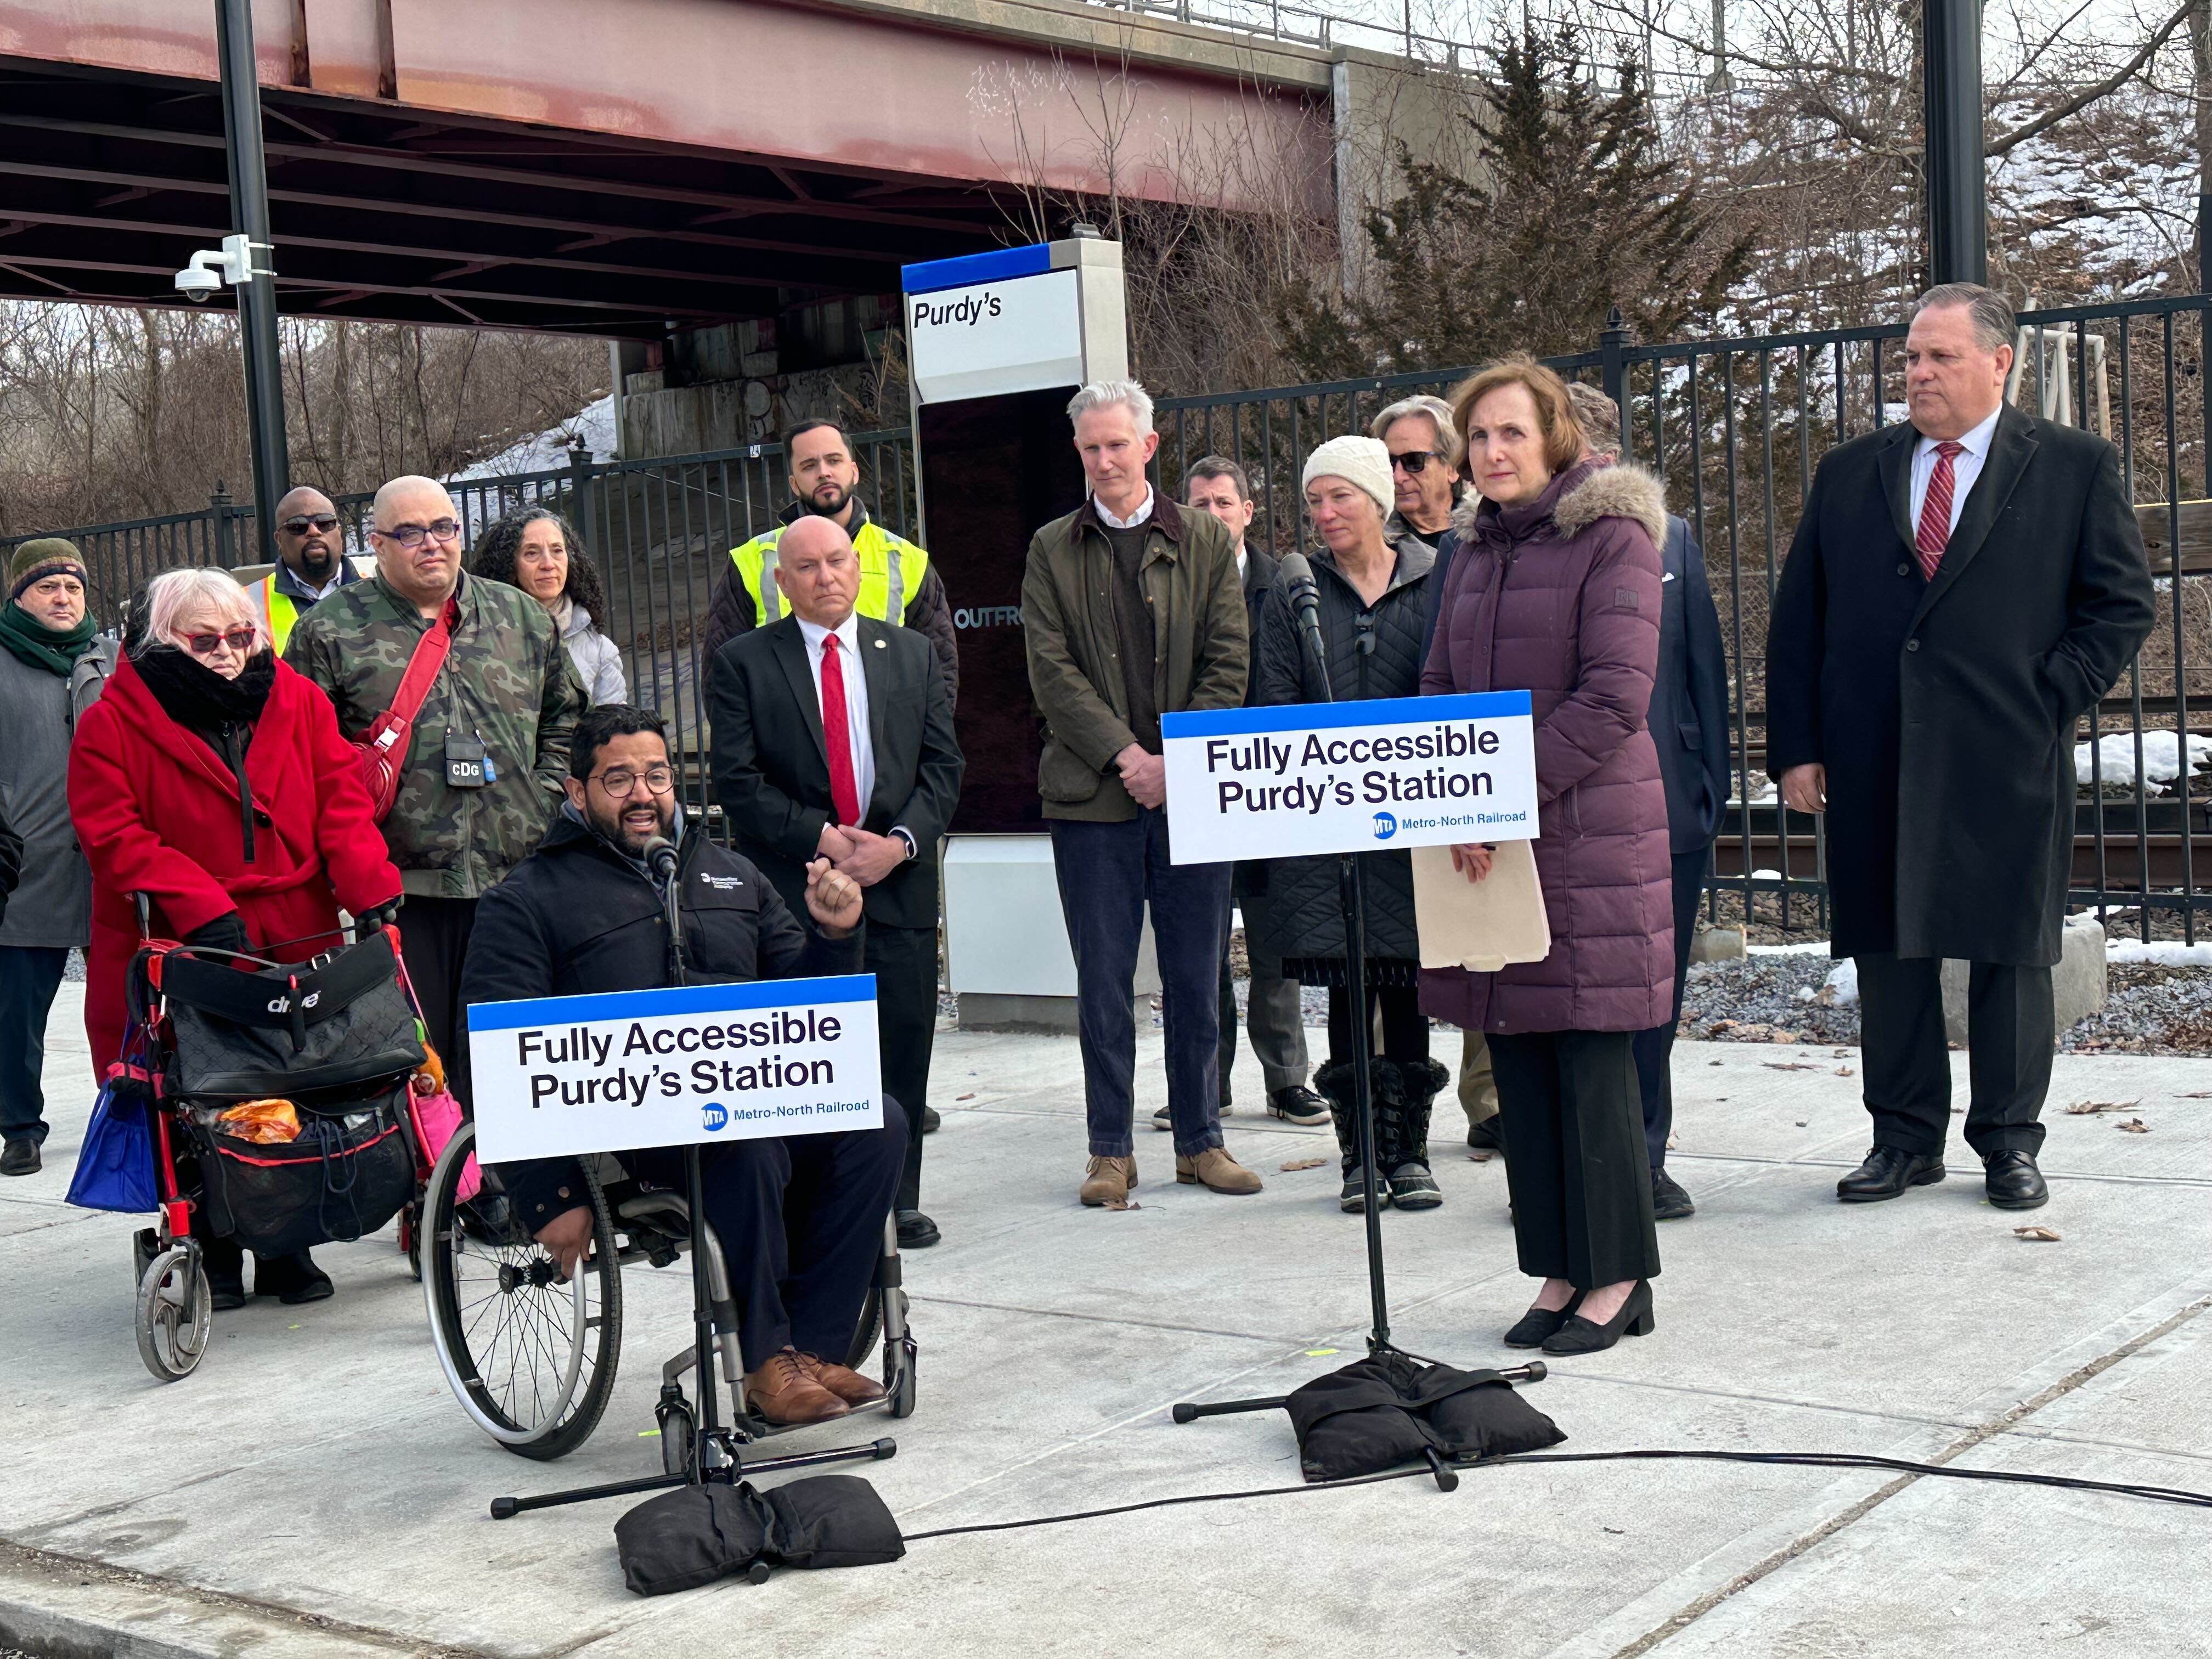 MTA Announces Purdy’s Station Becomes Third Metro-North Station to Be Made Fully Accessible This Year 